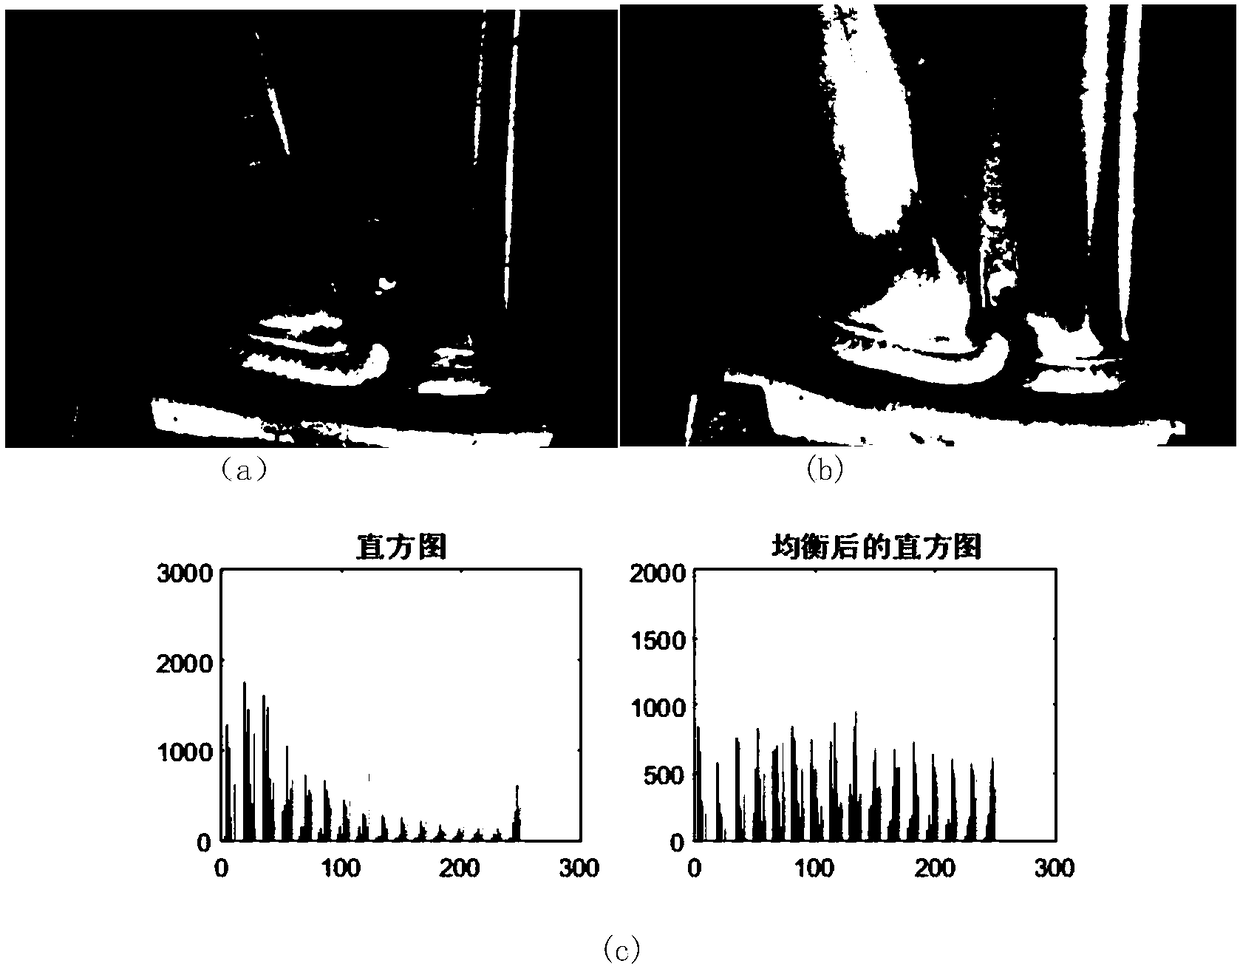 Welding defect feature extraction and welding quality analysis method based on image processing